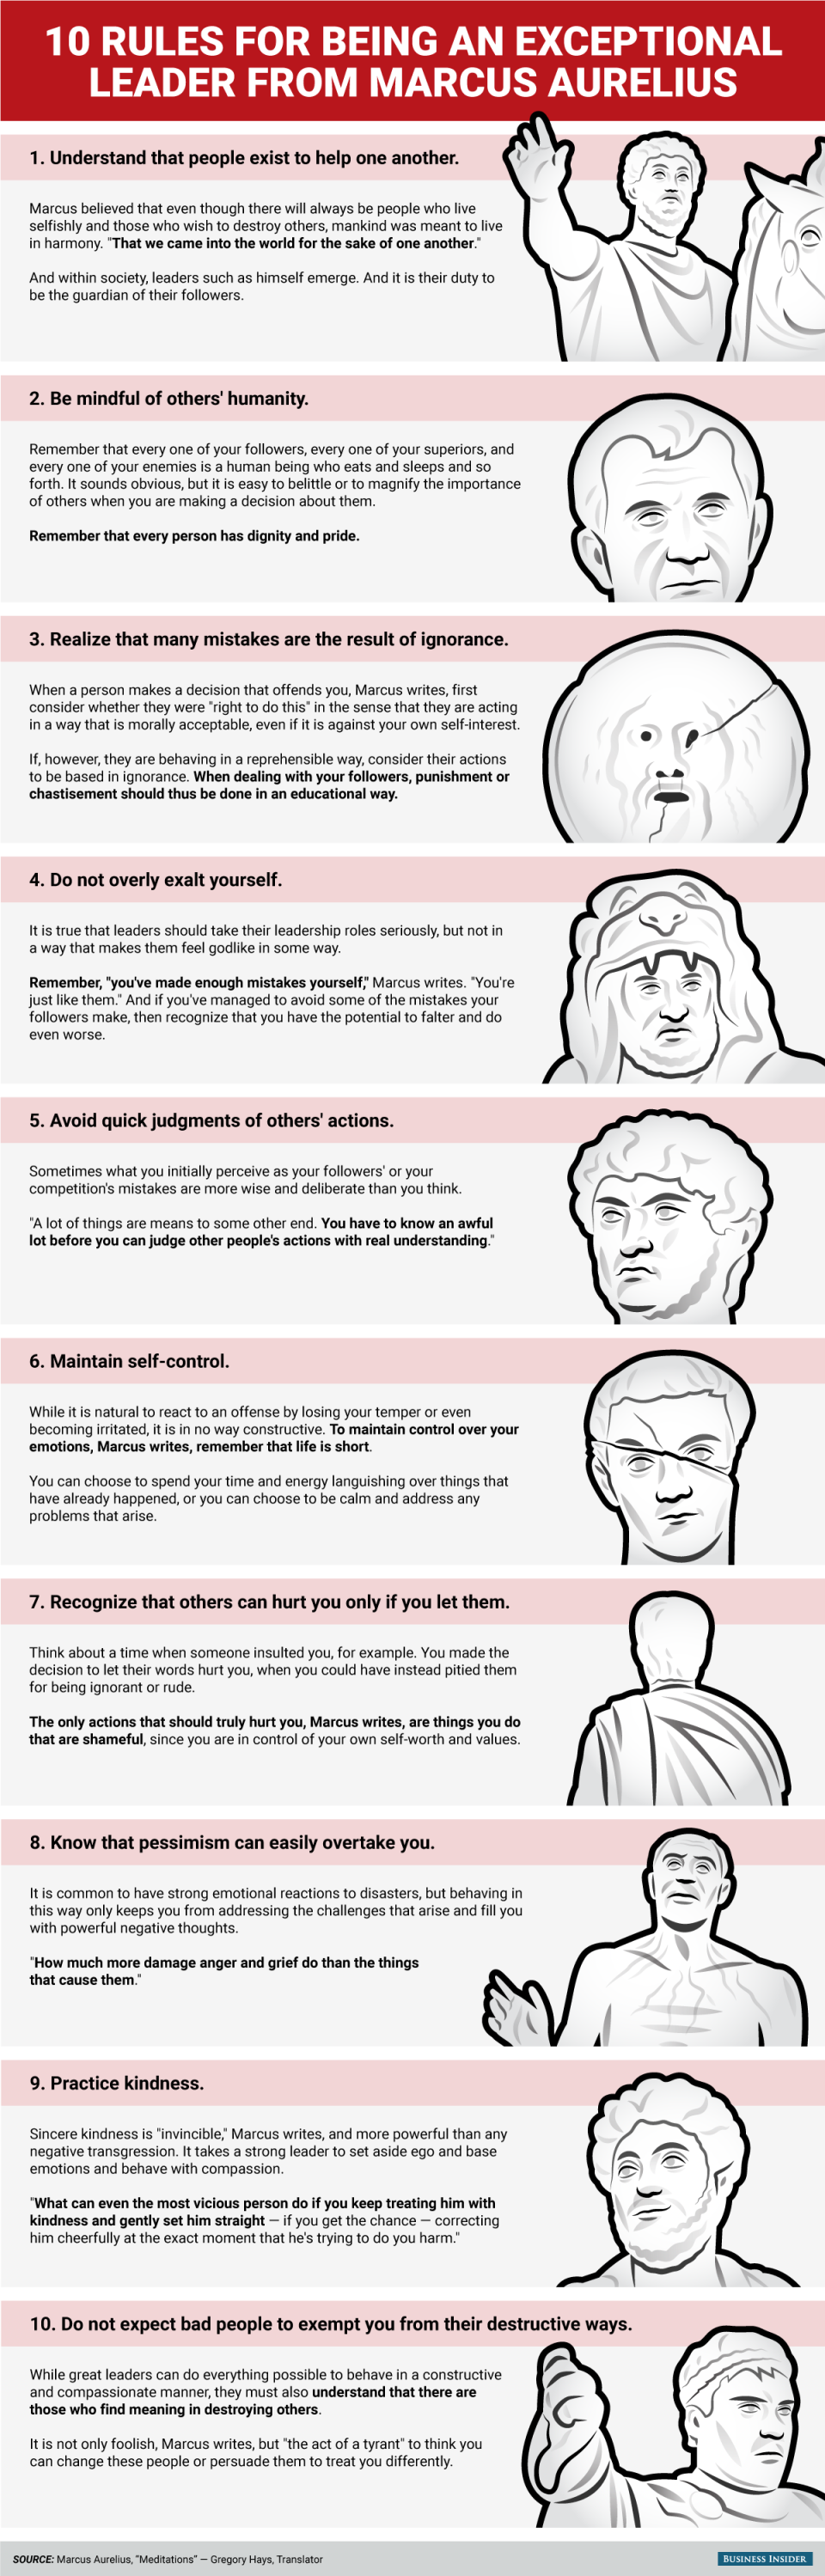 BI_Graphics_Rules for being an exceptional leader from Marcus Aurelius